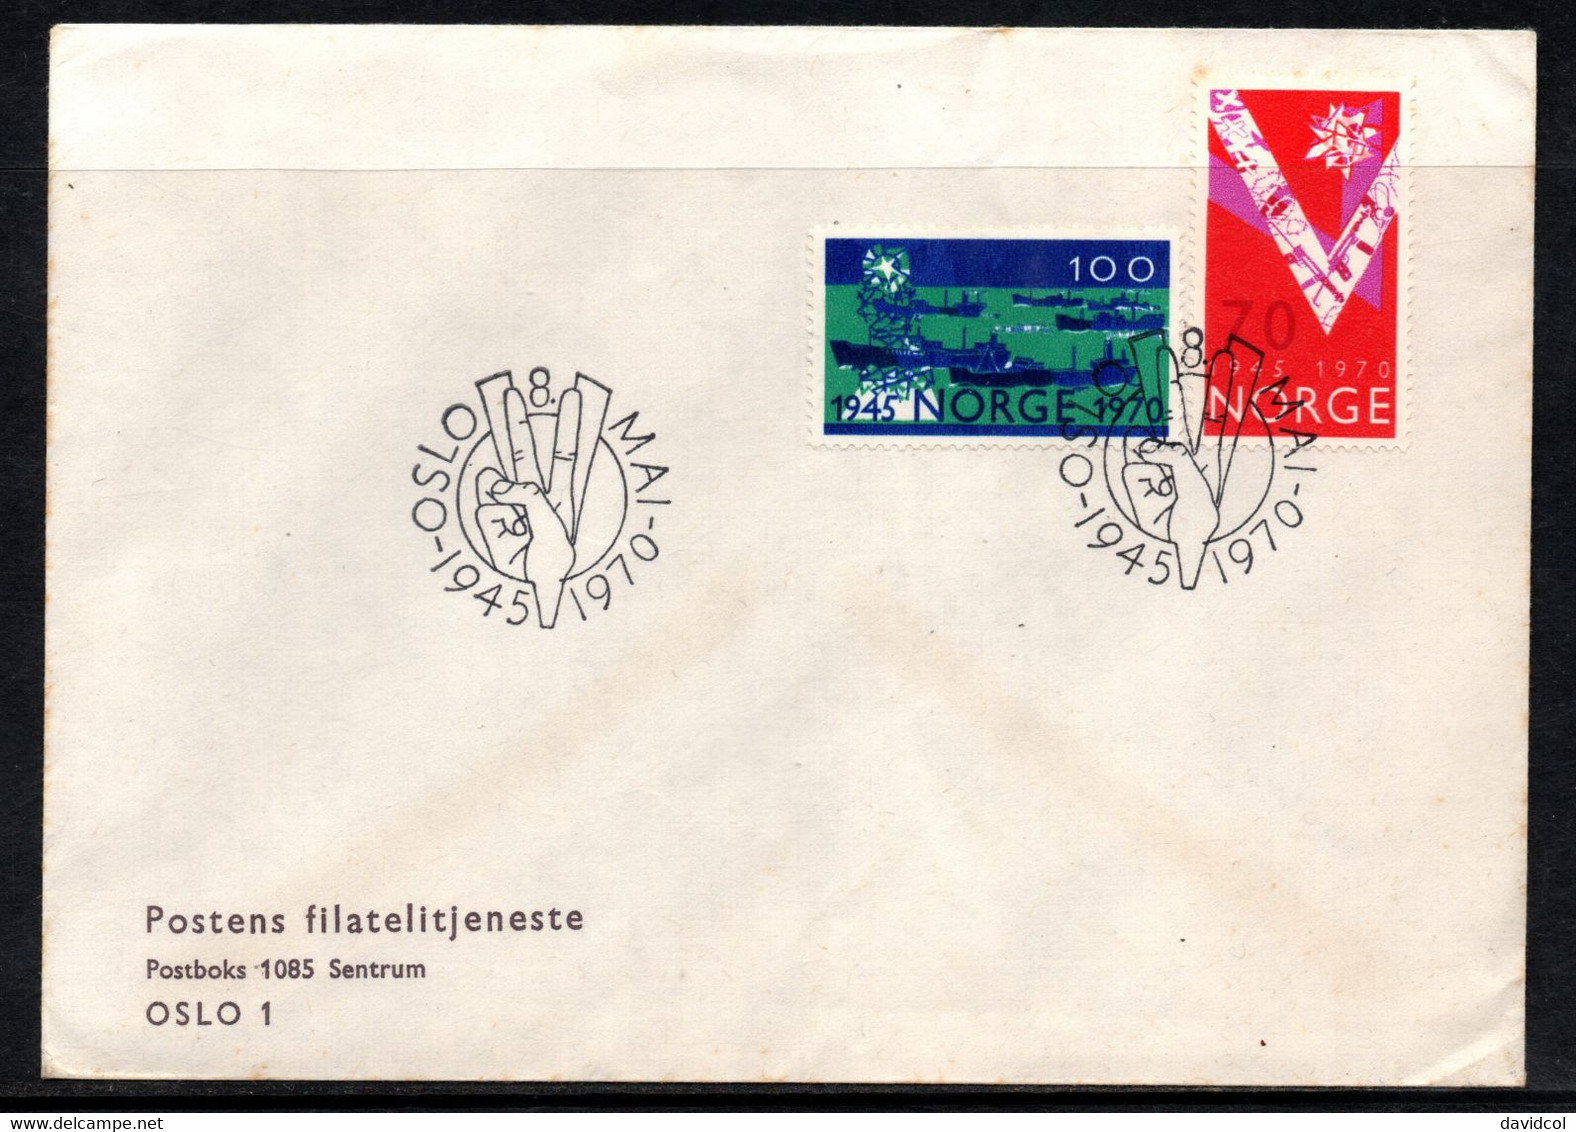 CA190- COVERAUCTION!!! - NORWAY 1970 - OSLO 8-5-70- NORWAY LIBERATION FROM THE GERMANS, 25TH ANNIVERSARY - Lettres & Documents